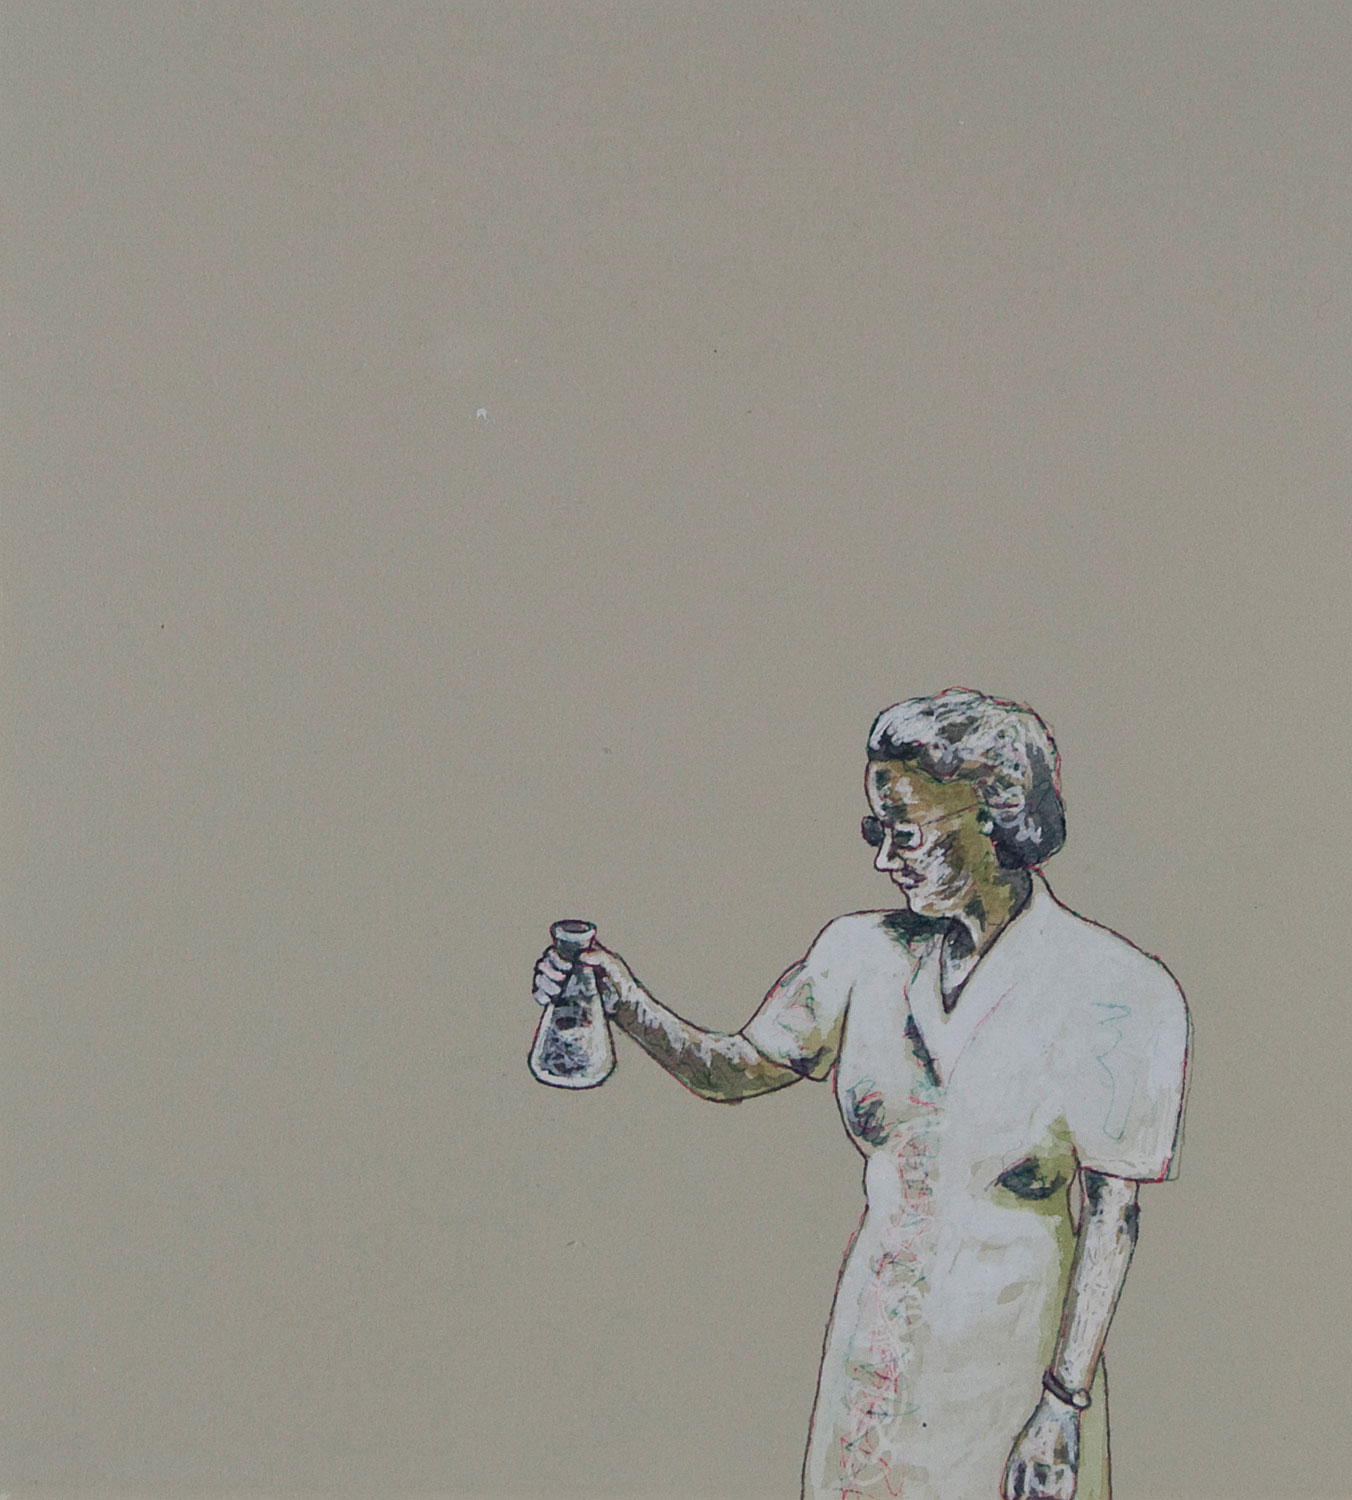 Zina Mussmann, Solution, 2012. Mixed media on paper, 5.5 x 5 in.